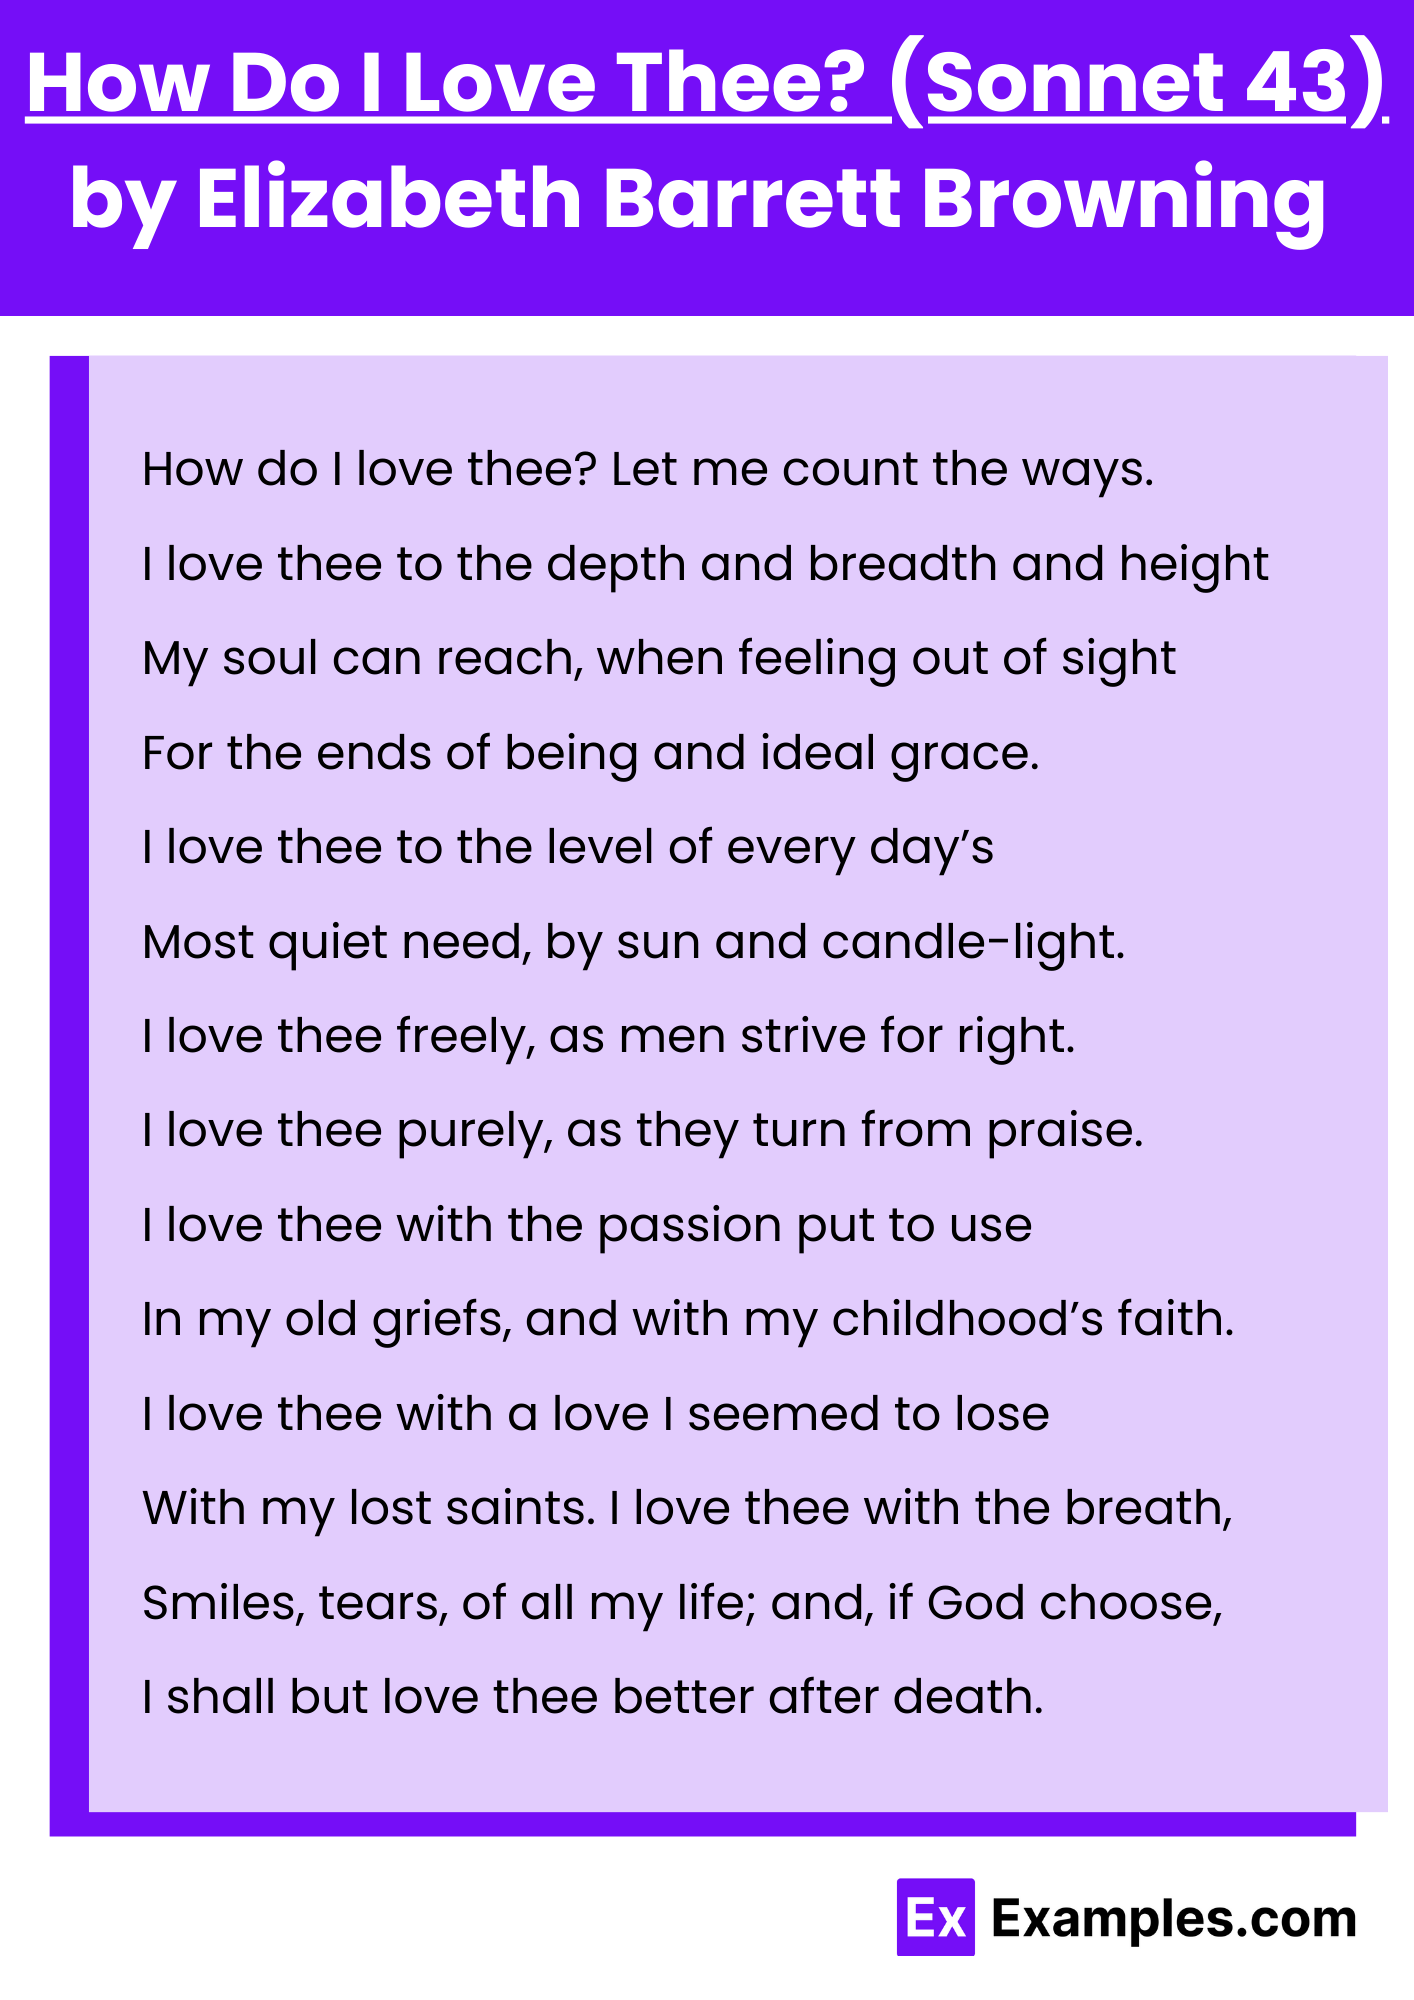 How Do I Love Thee (Sonnet 43) by Elizabeth Barrett Browning